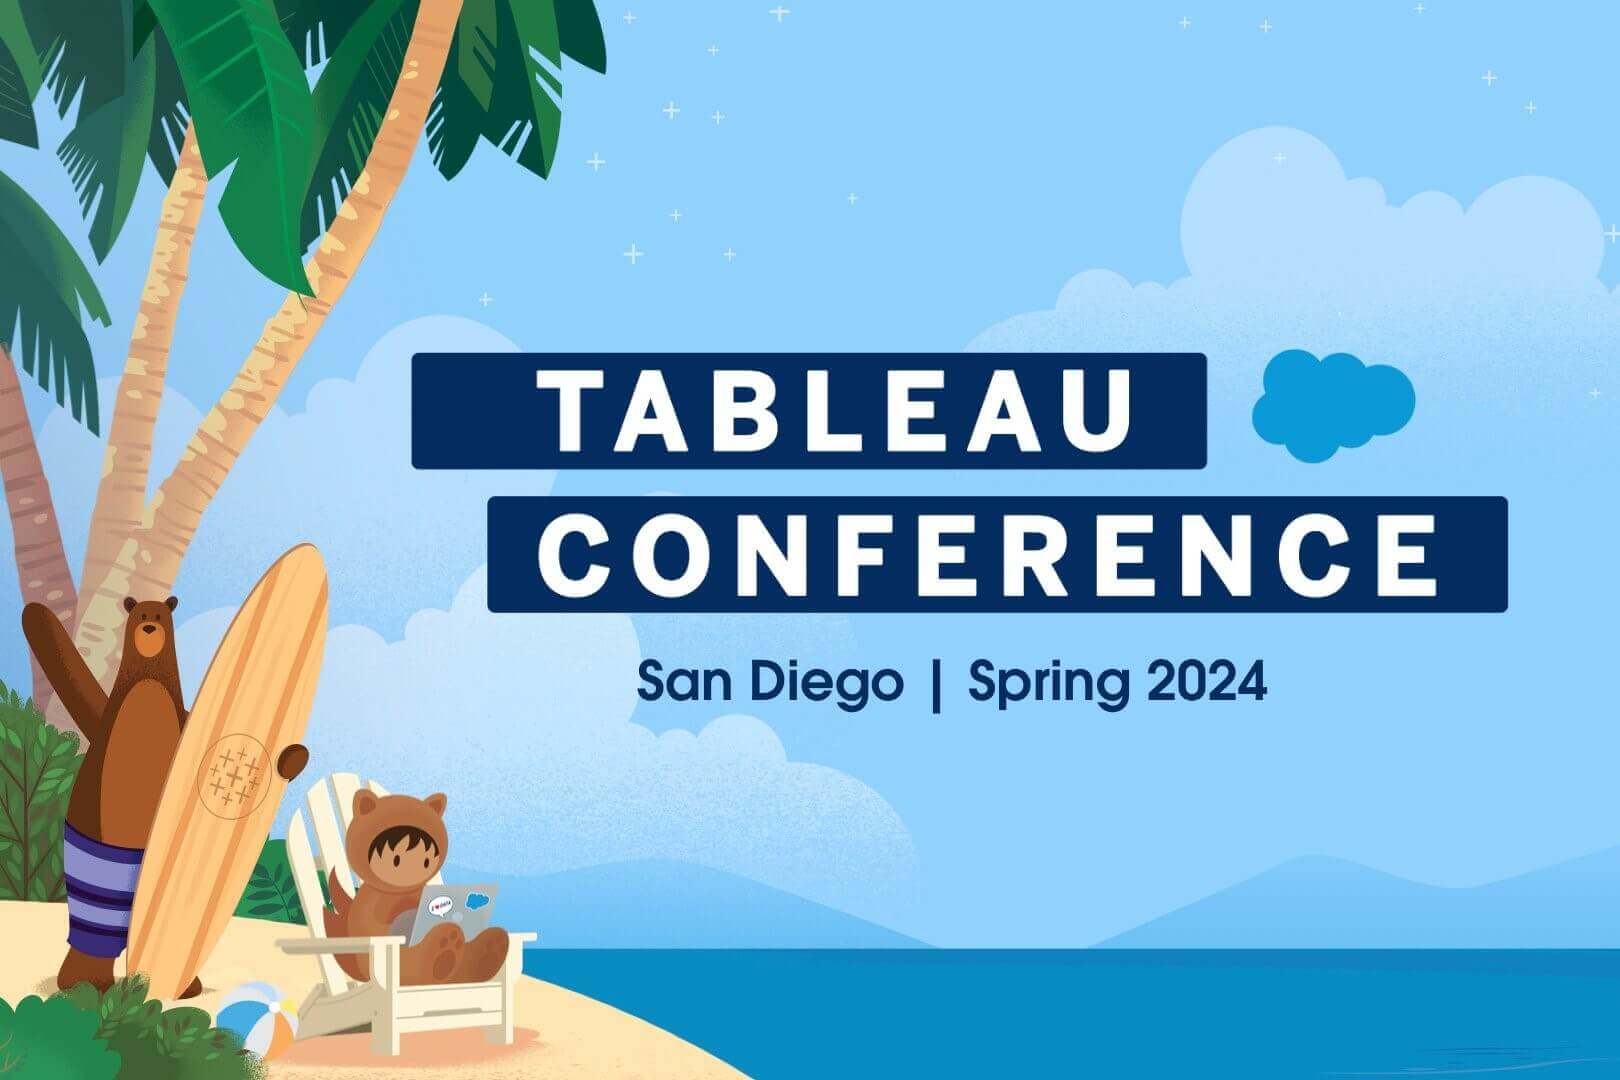 Tableau conference 2024